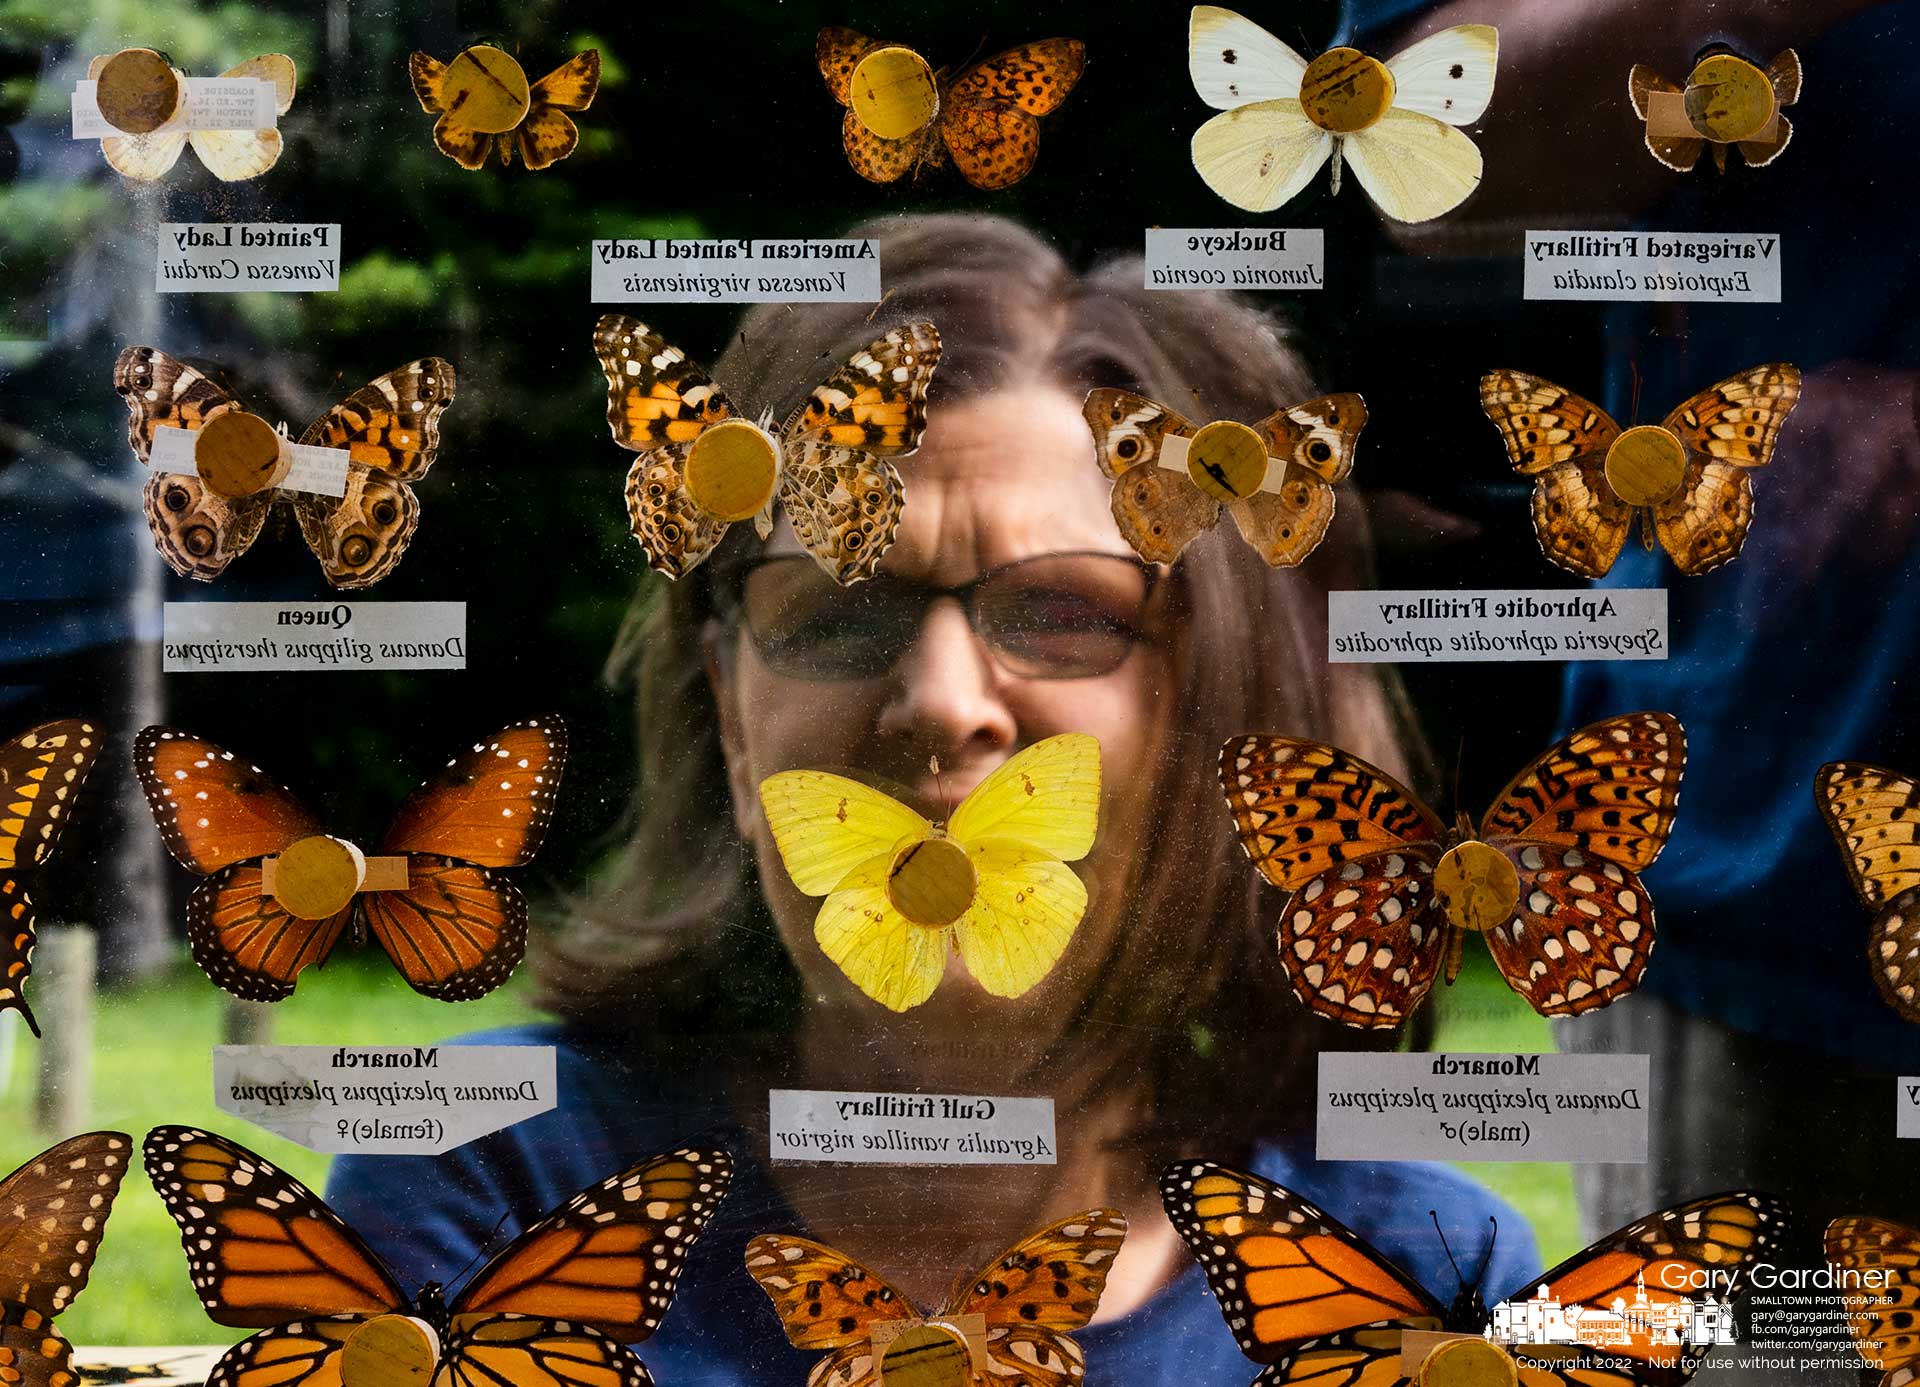 A woman studies a collection of butterflies shown to a crowd gathered at Hoover Meadows Park for a nature walk through open prairie and woods to observe living specimens of butterflies and moths. My Final Photo for August 13, 2022.